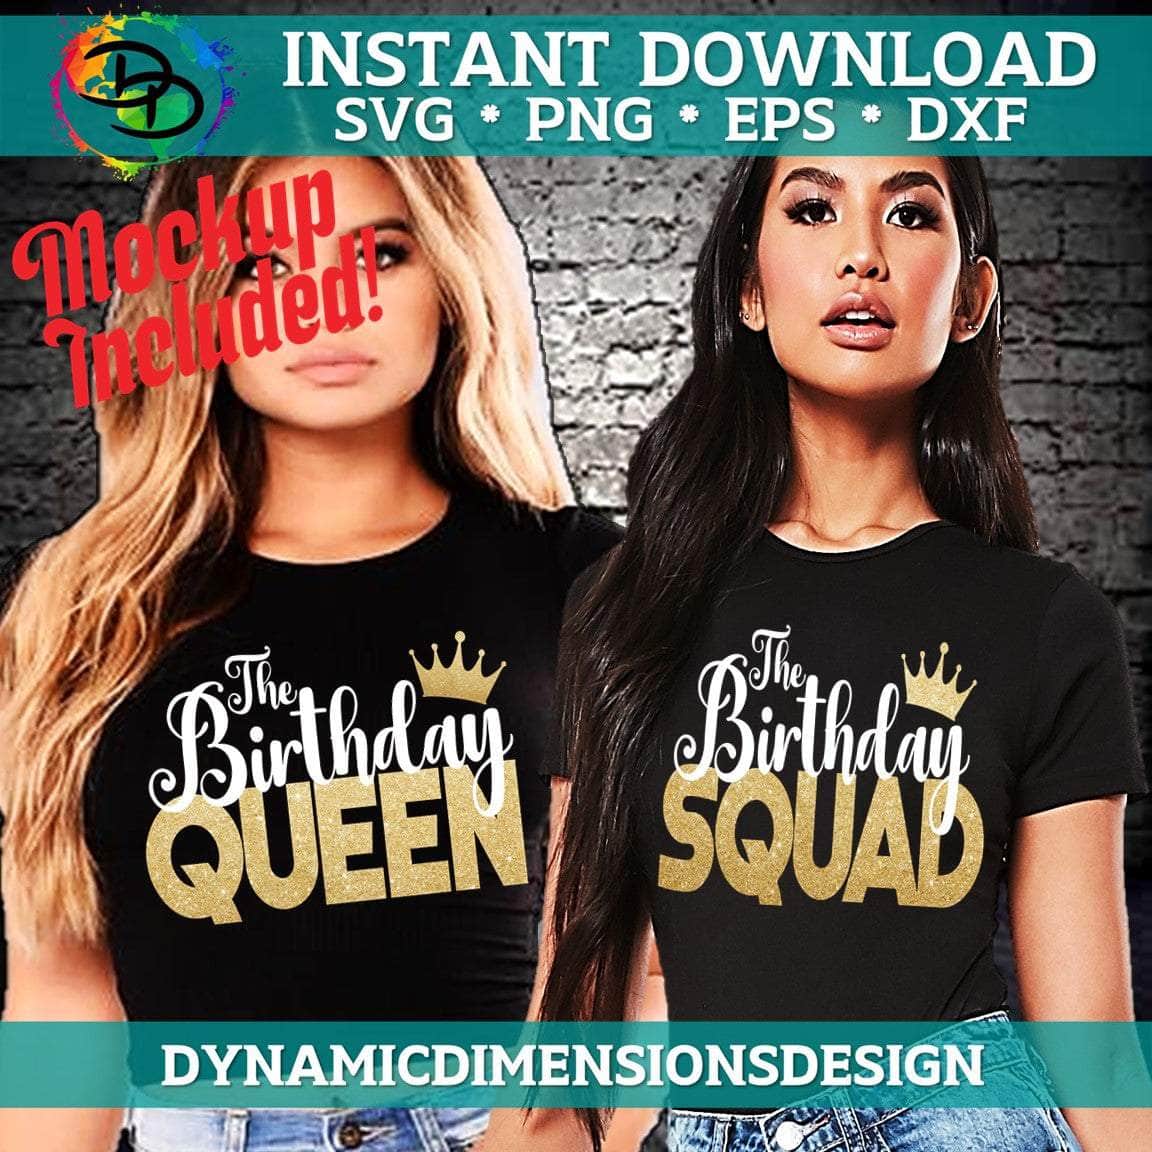 Birthday Queen Birthday Squad Bundle svg, png, instant download, dxf, eps, pdf, jpg, cricut, silhouette, sublimtion, printable